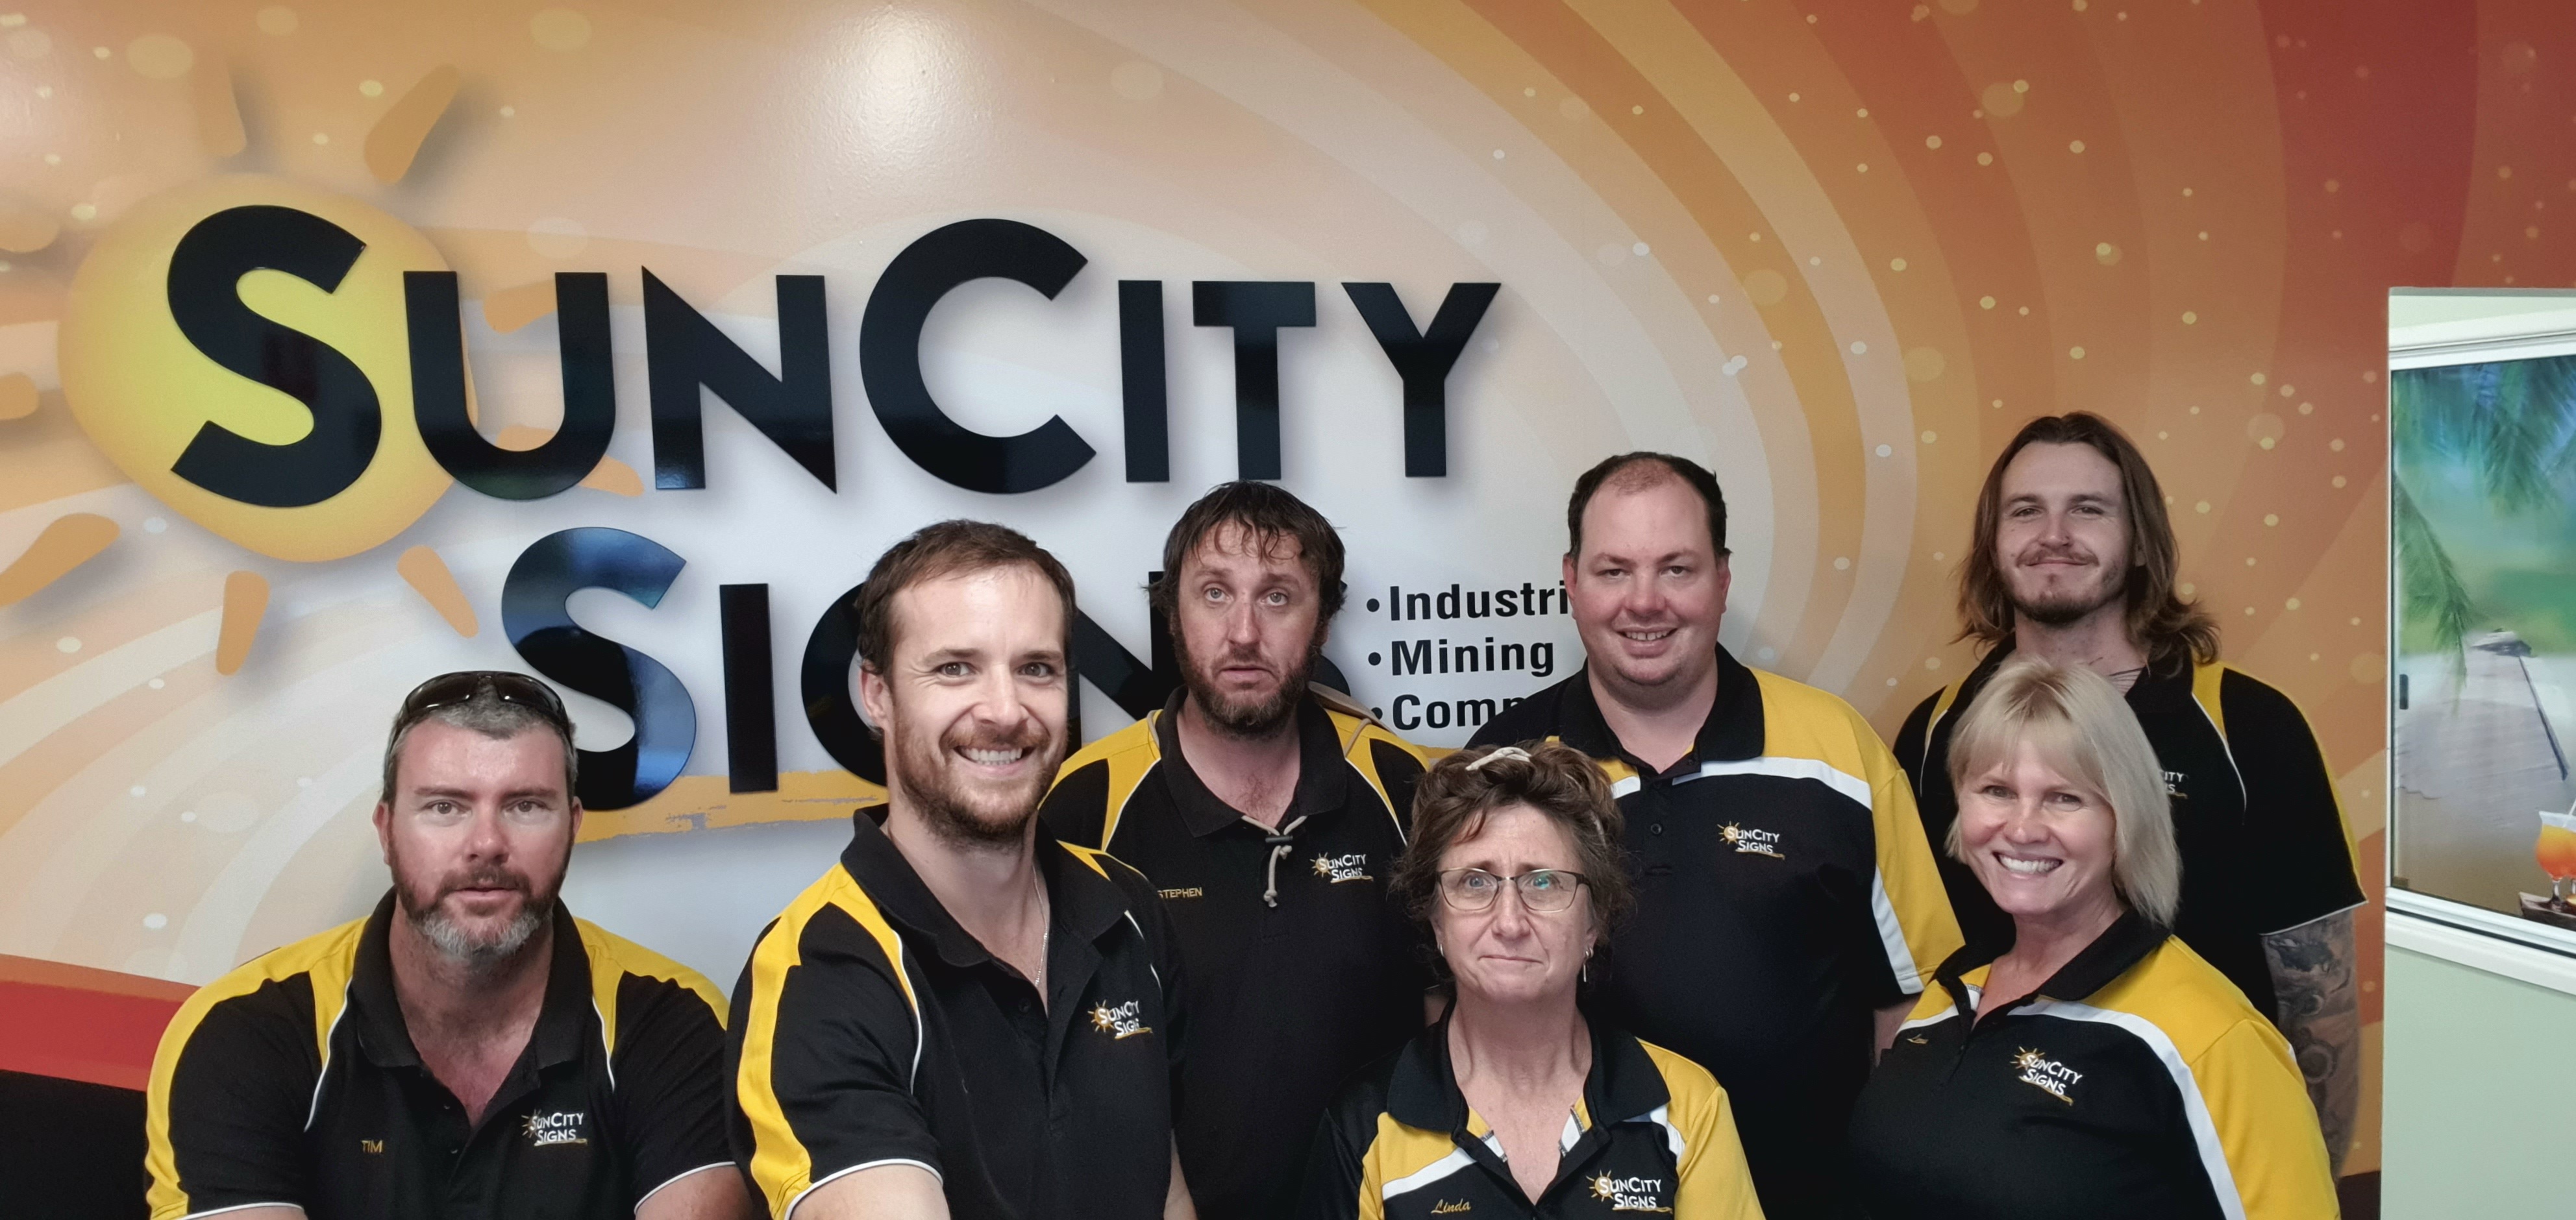 Sun City Signs: providing Mackay with dazzling signage solutions since 1975